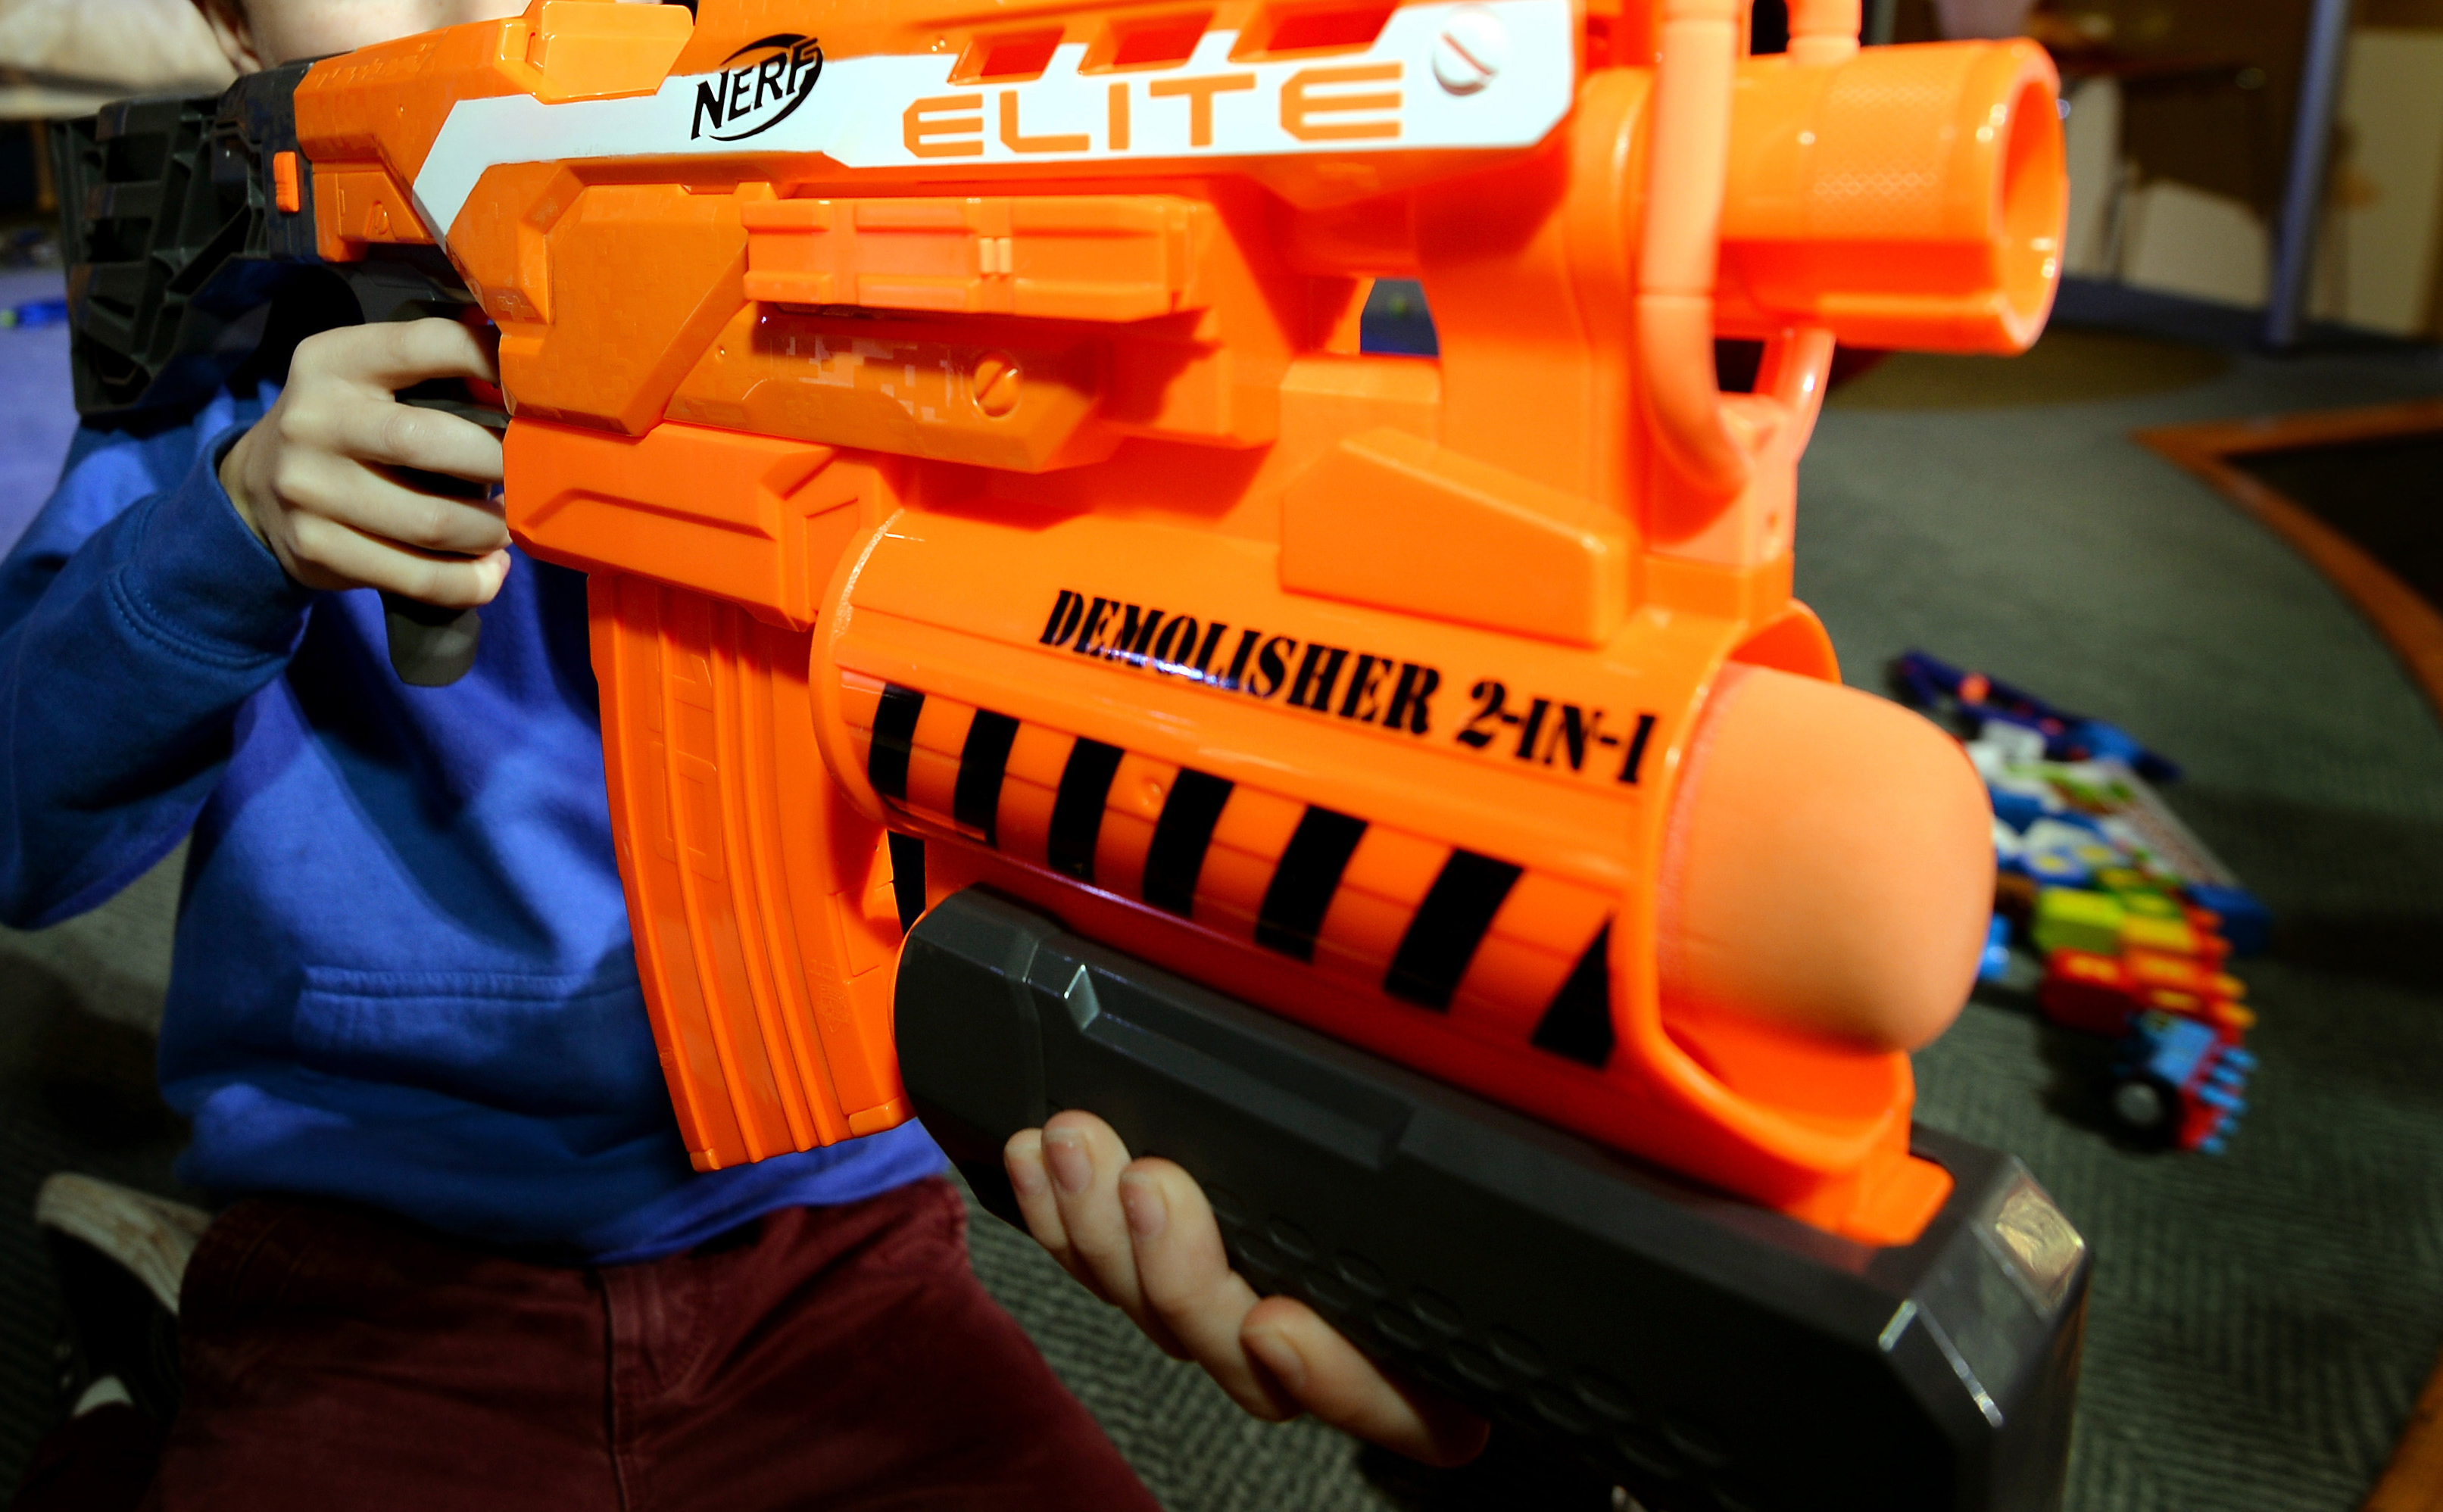 Nerf guns can lead to serious eye injuries, doctors warn ...